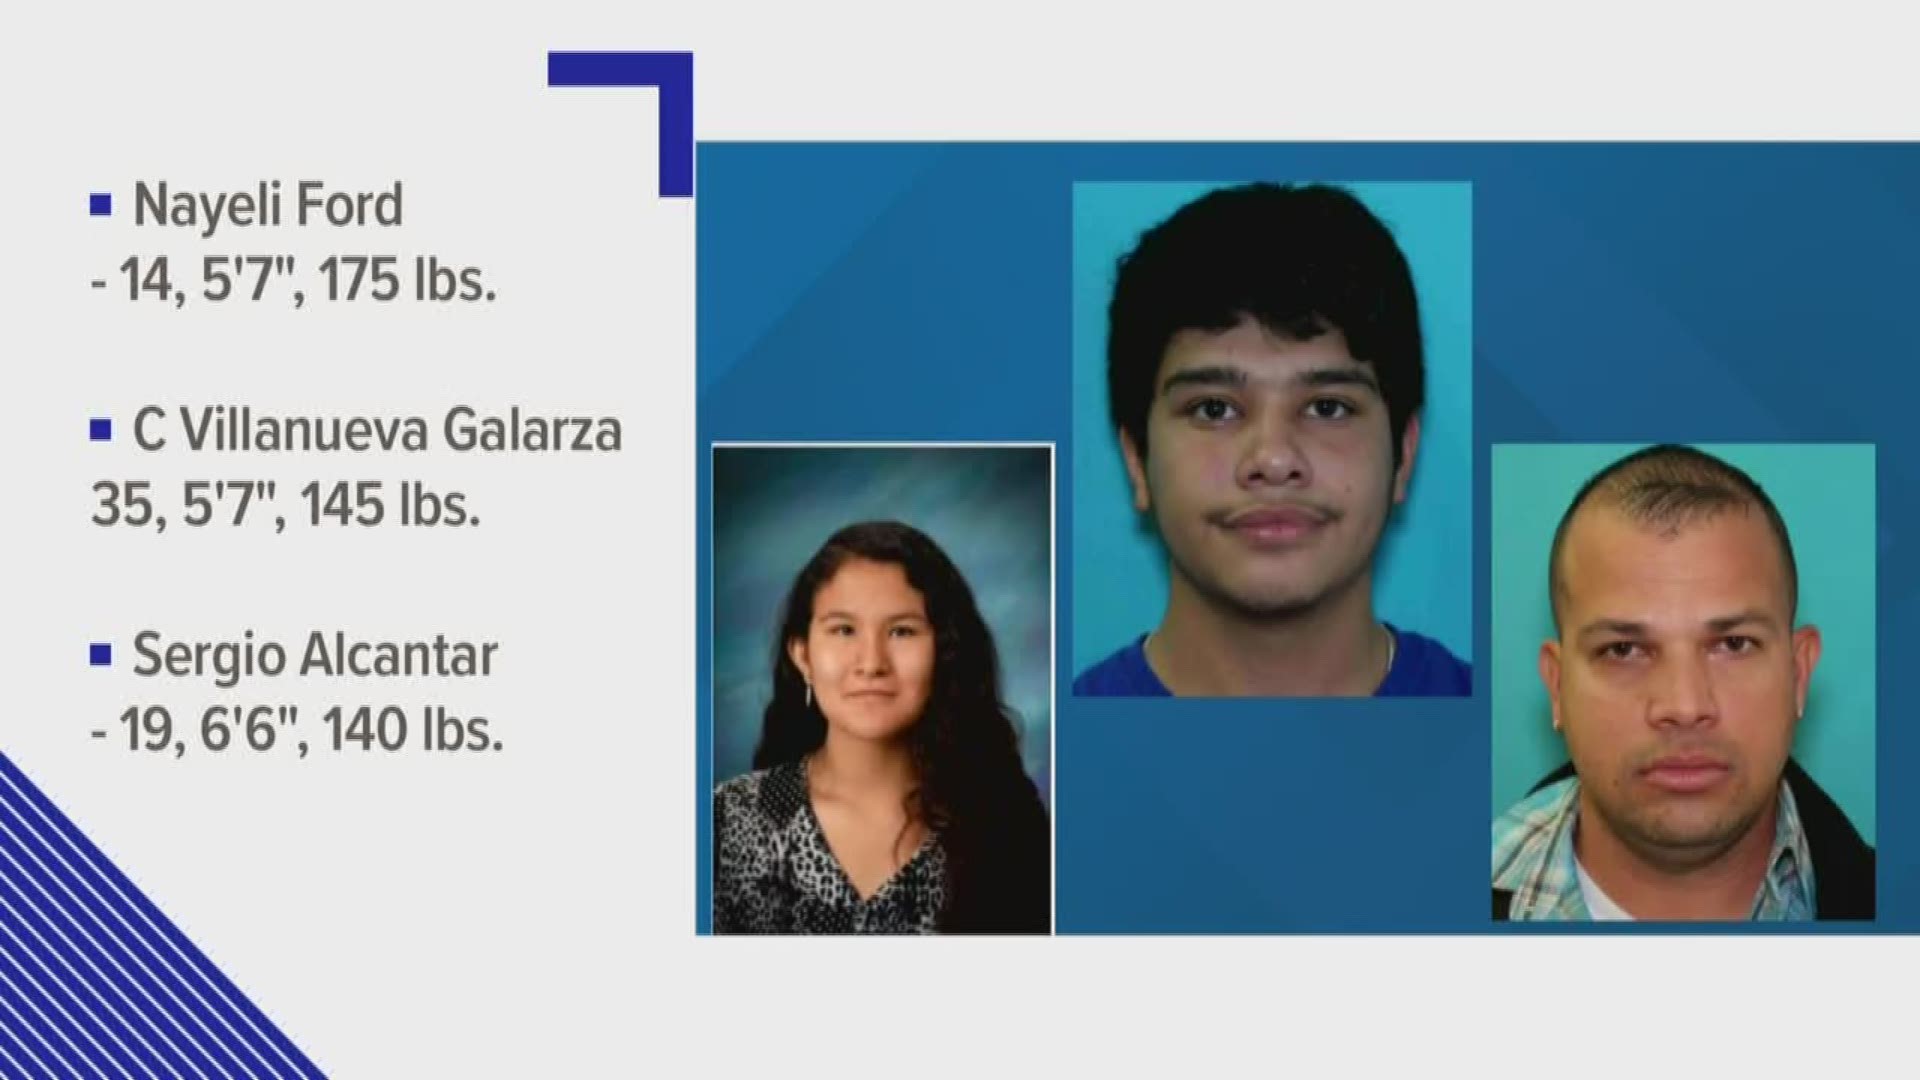 Authorities are looking for two suspects in connection to the kidnapping.